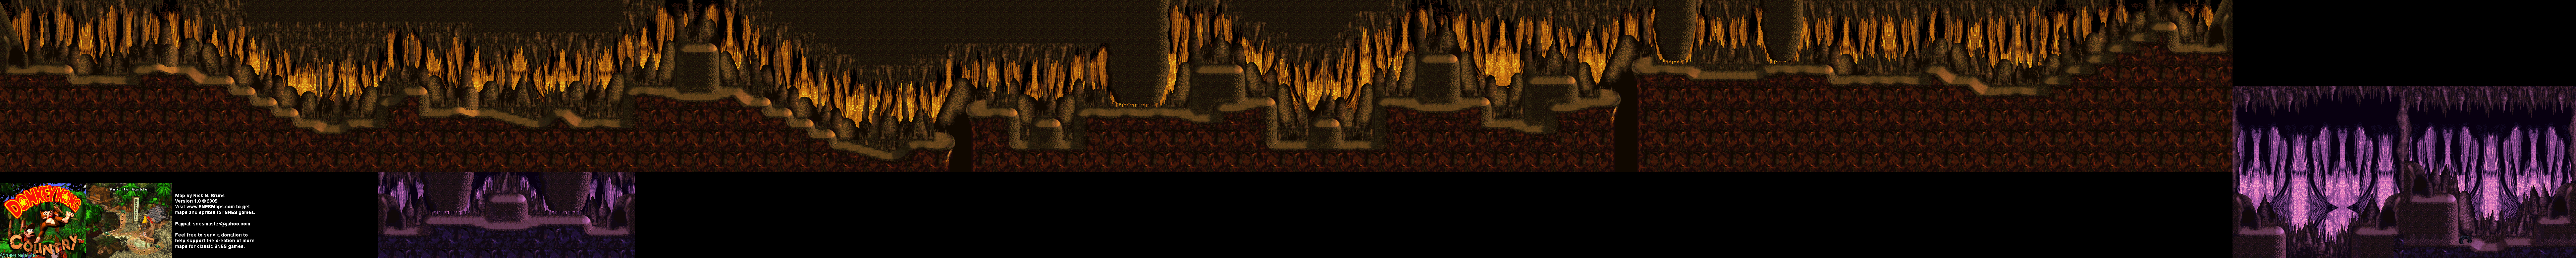 Donkey Kong Country - Level 3 - Reptile Rumble - Super Nintendo SNES Background Map